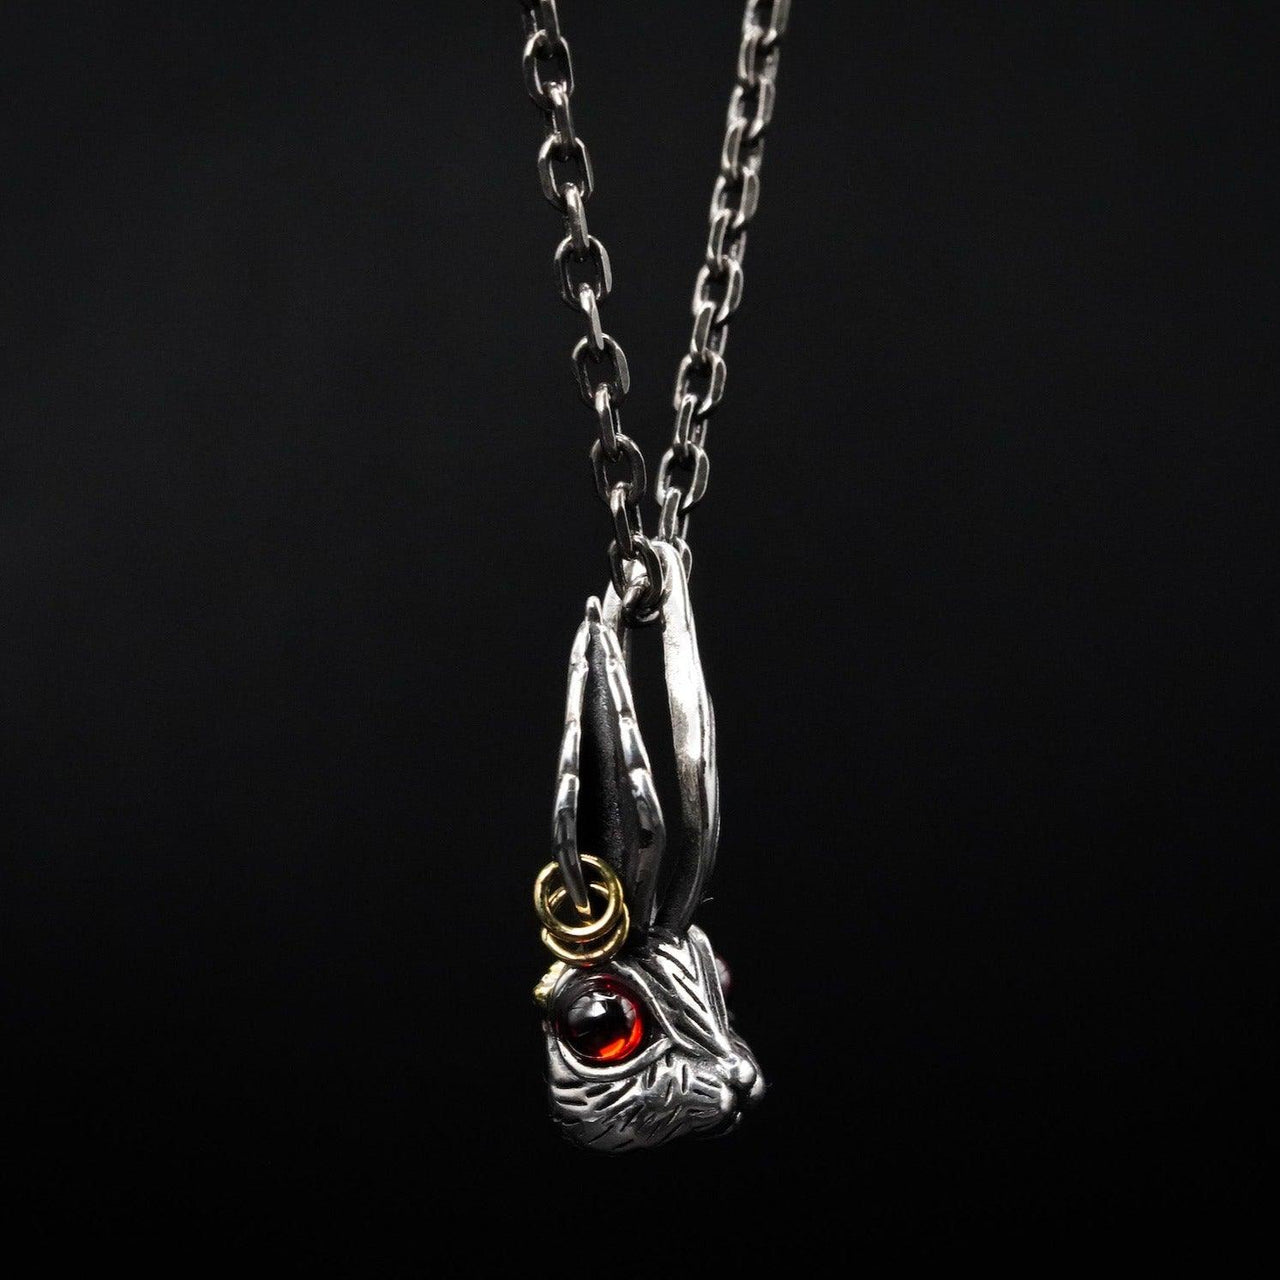 Red Eyed rabbit pendant made in sterling silver by Black Feather Design